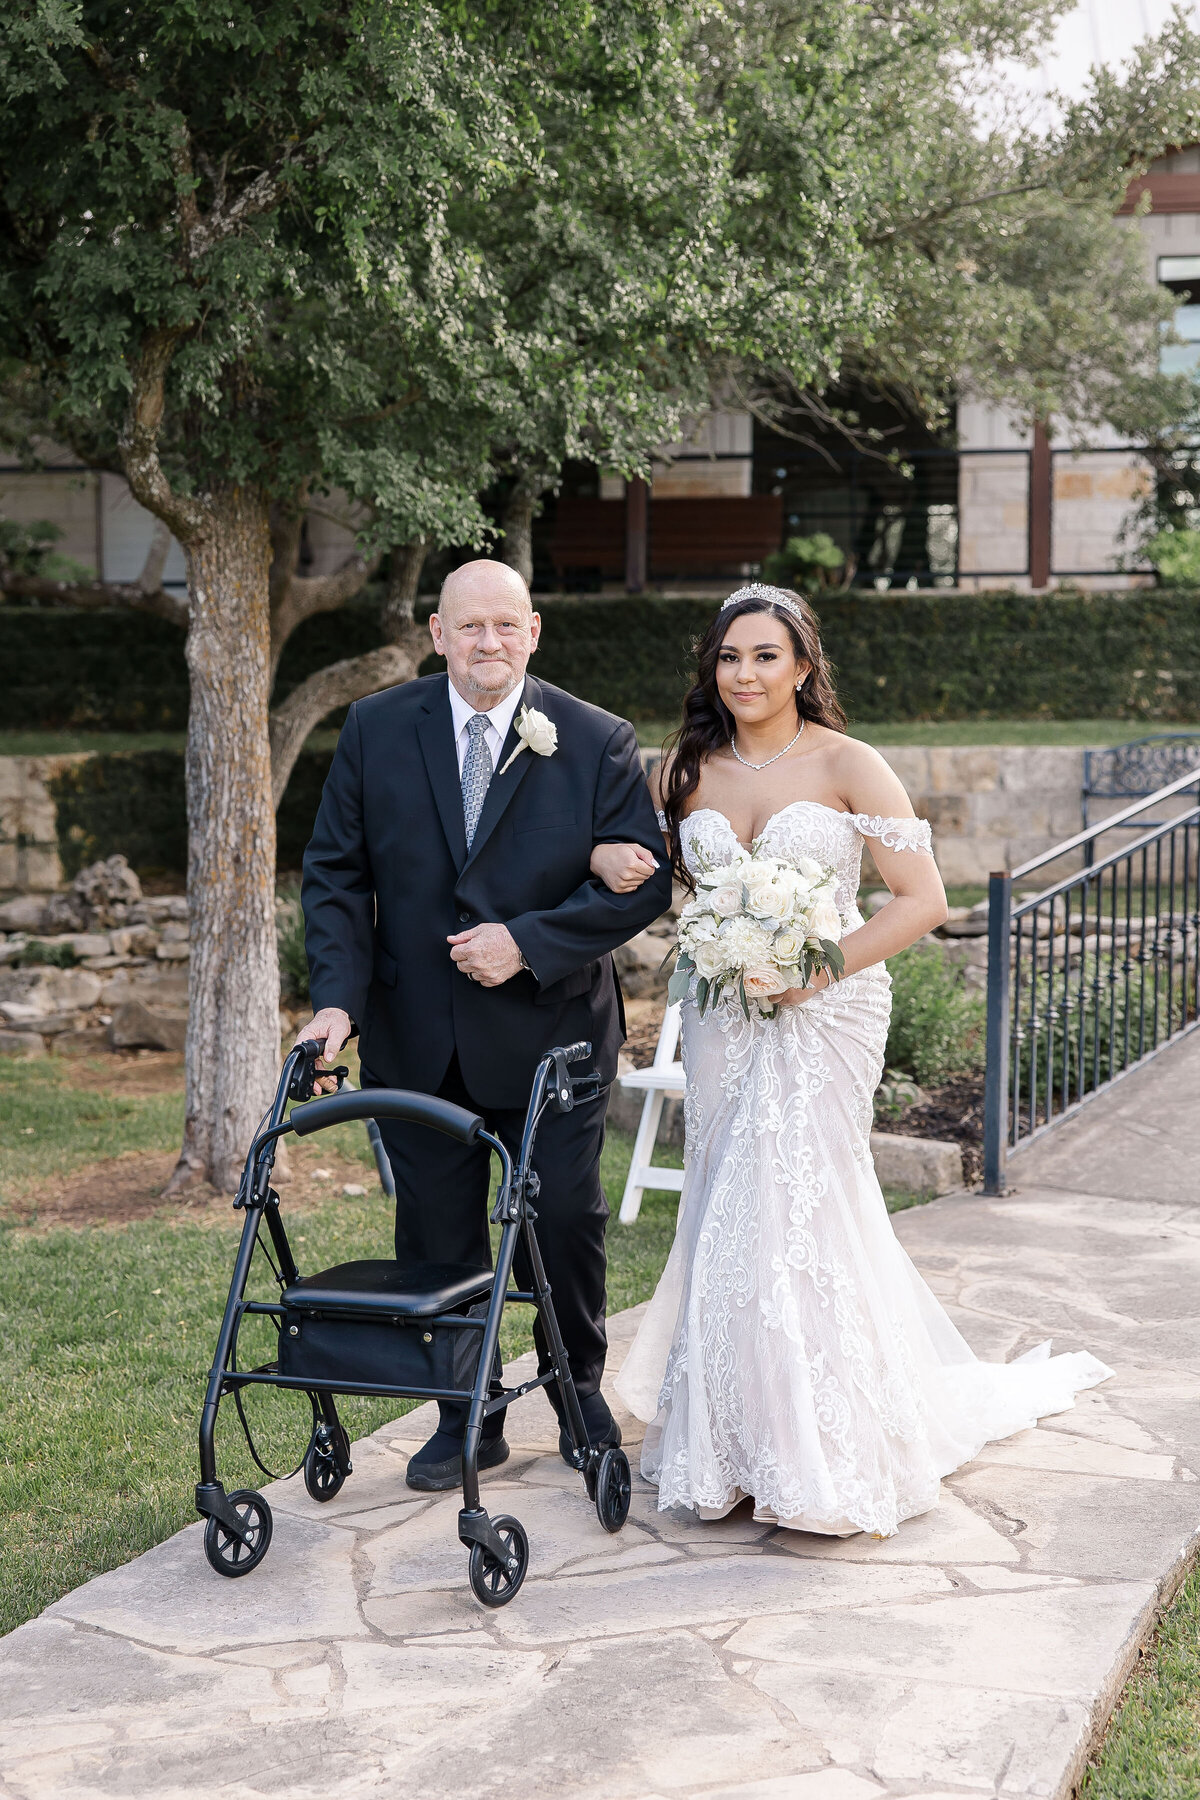 grandfather with walker leads bride down aisle at outdoor Milestone New Braunfels wedding